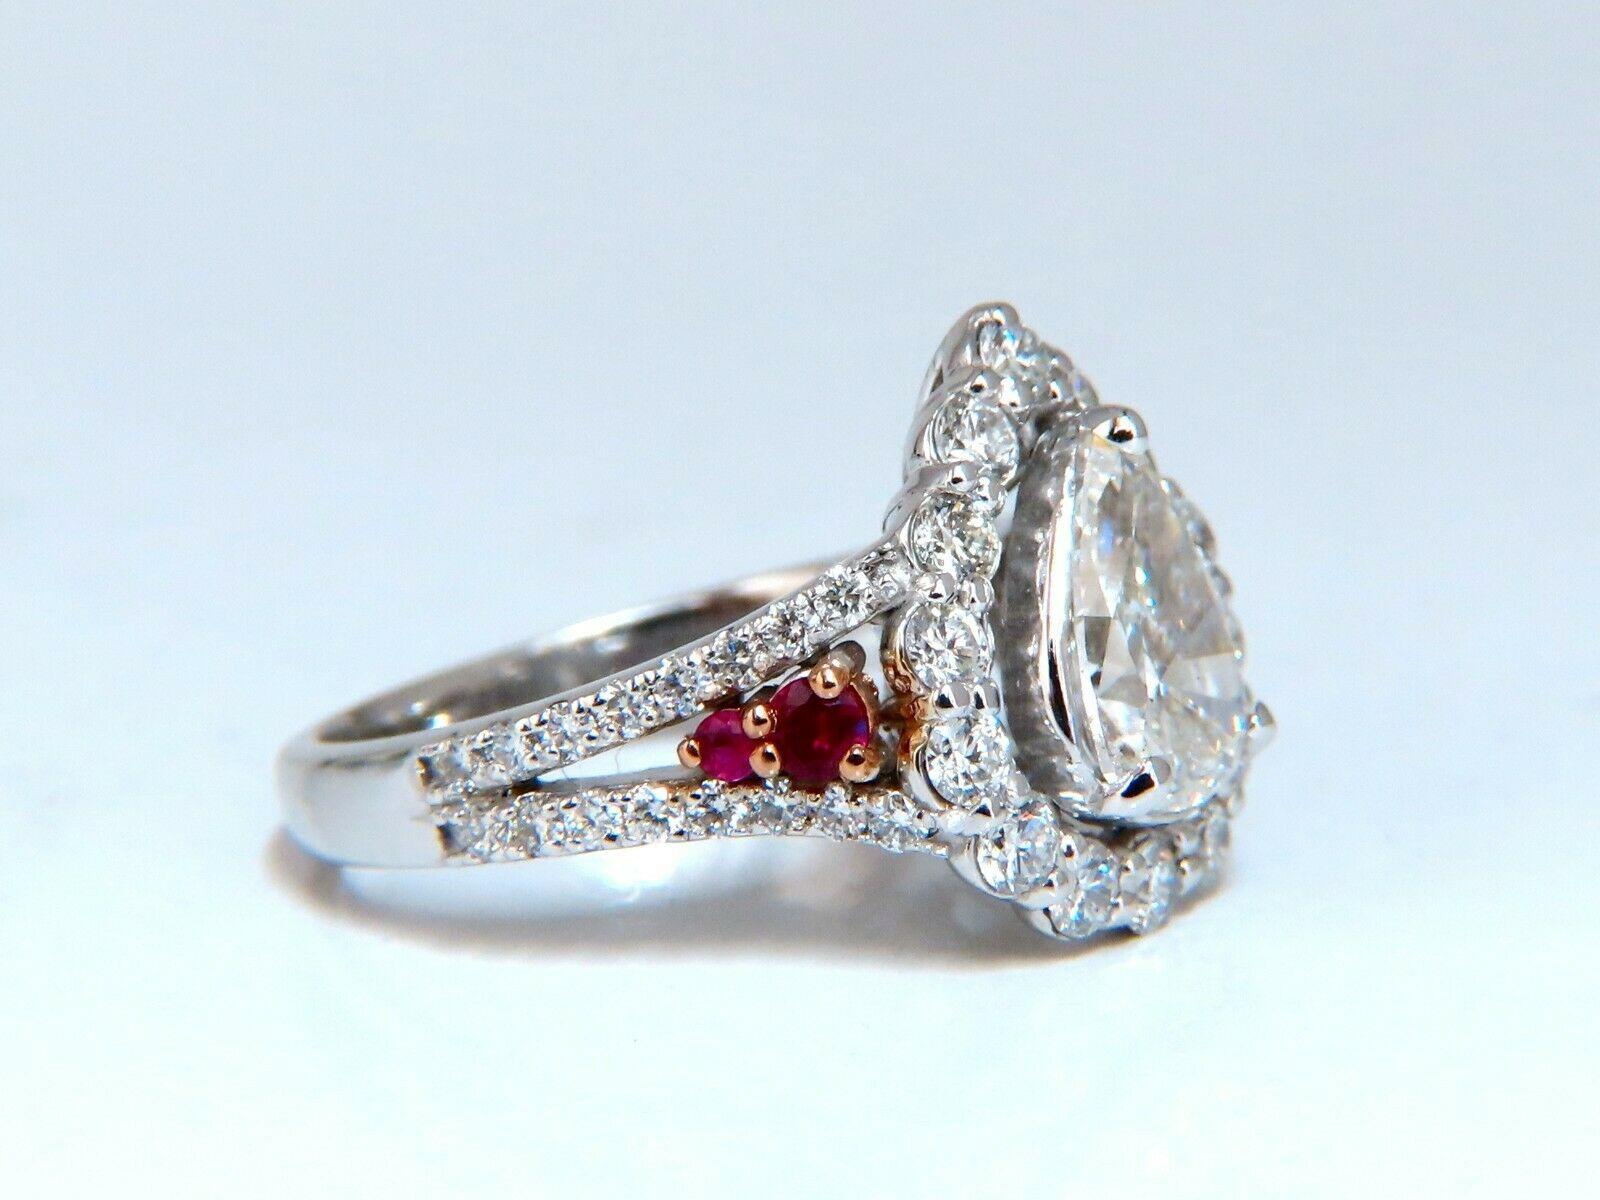 Pear Diamond cluster ring.

1.30ct. Natural Pear Shape diamond

J color Si-2 clarity 

1.00ct side round diamonds.

G-color vS-2 clarity

.10ct Natural Round Rubies

14kt. white gold.

Ring size: 7

We may resize.

Deck of ring: 15 X 12mm

Depth of